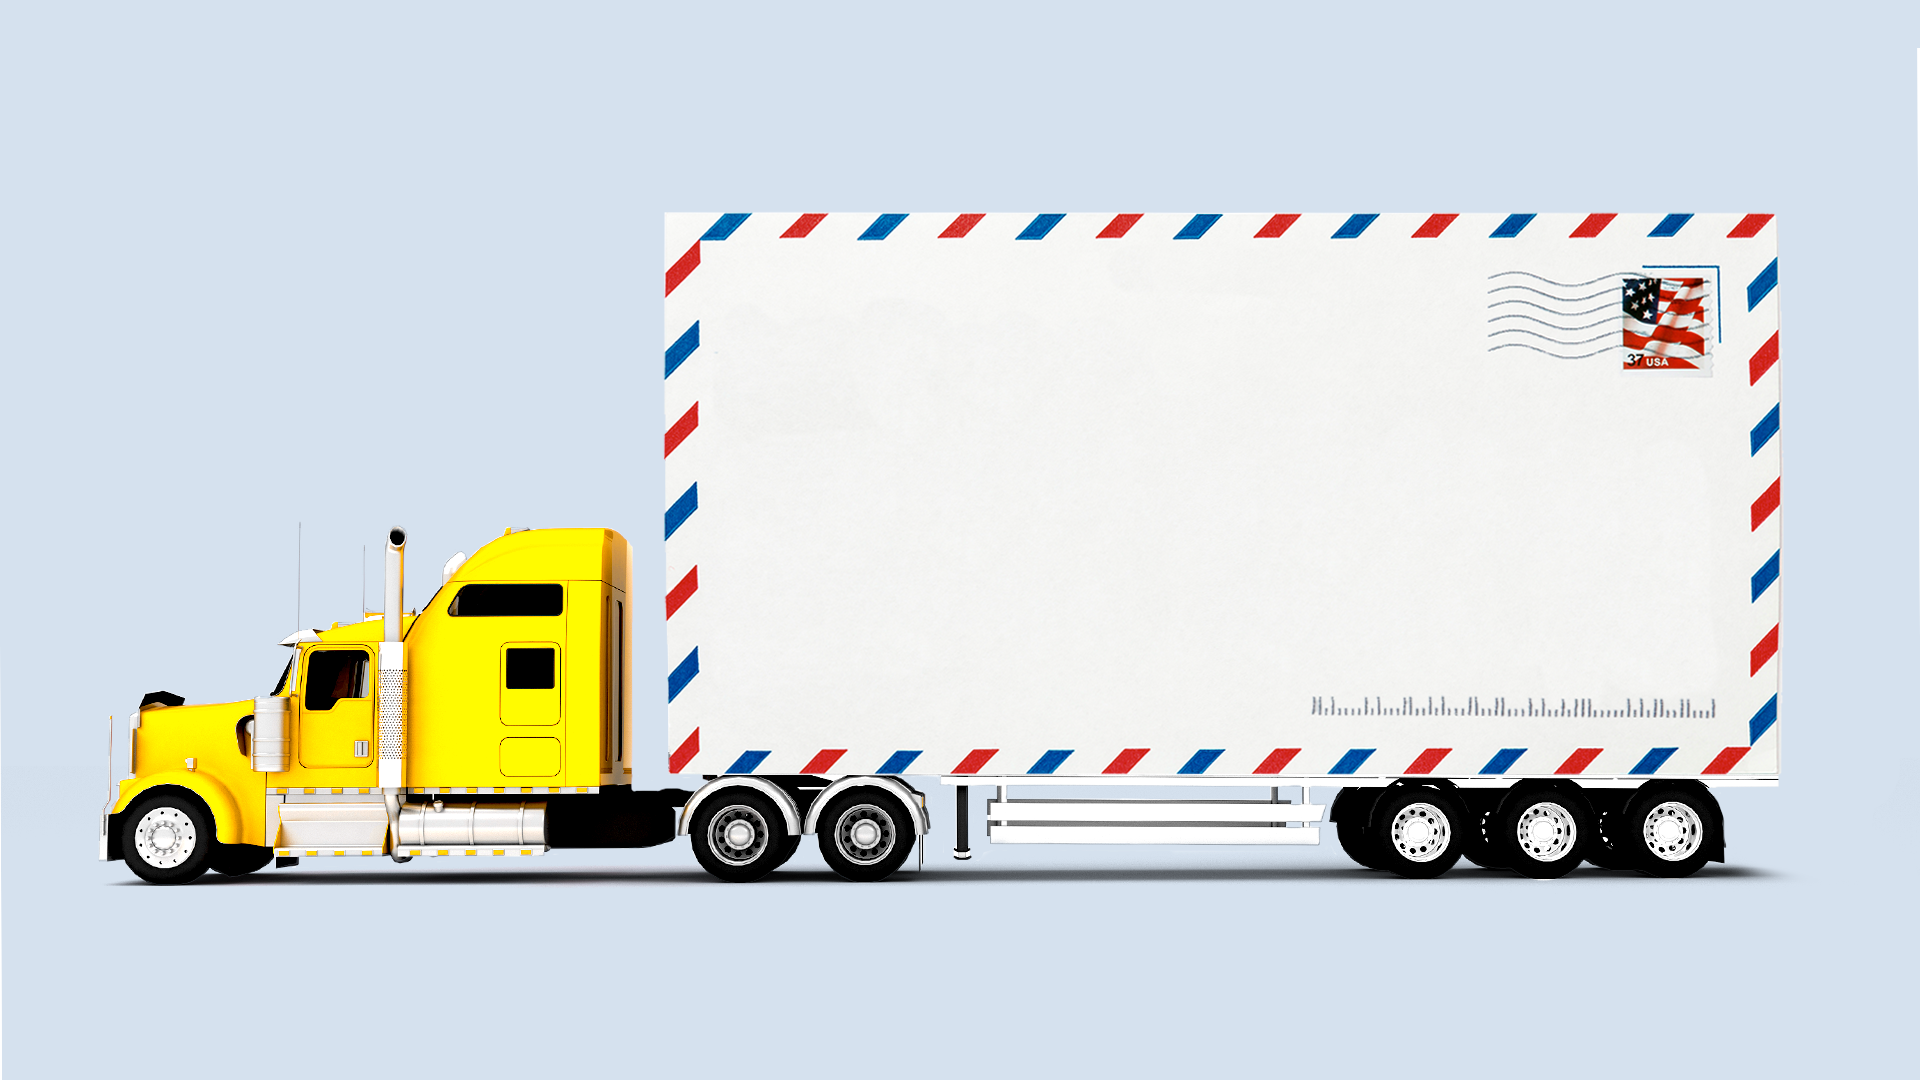 Illustration of an 18-wheeler with an envelope as the semi-trailer